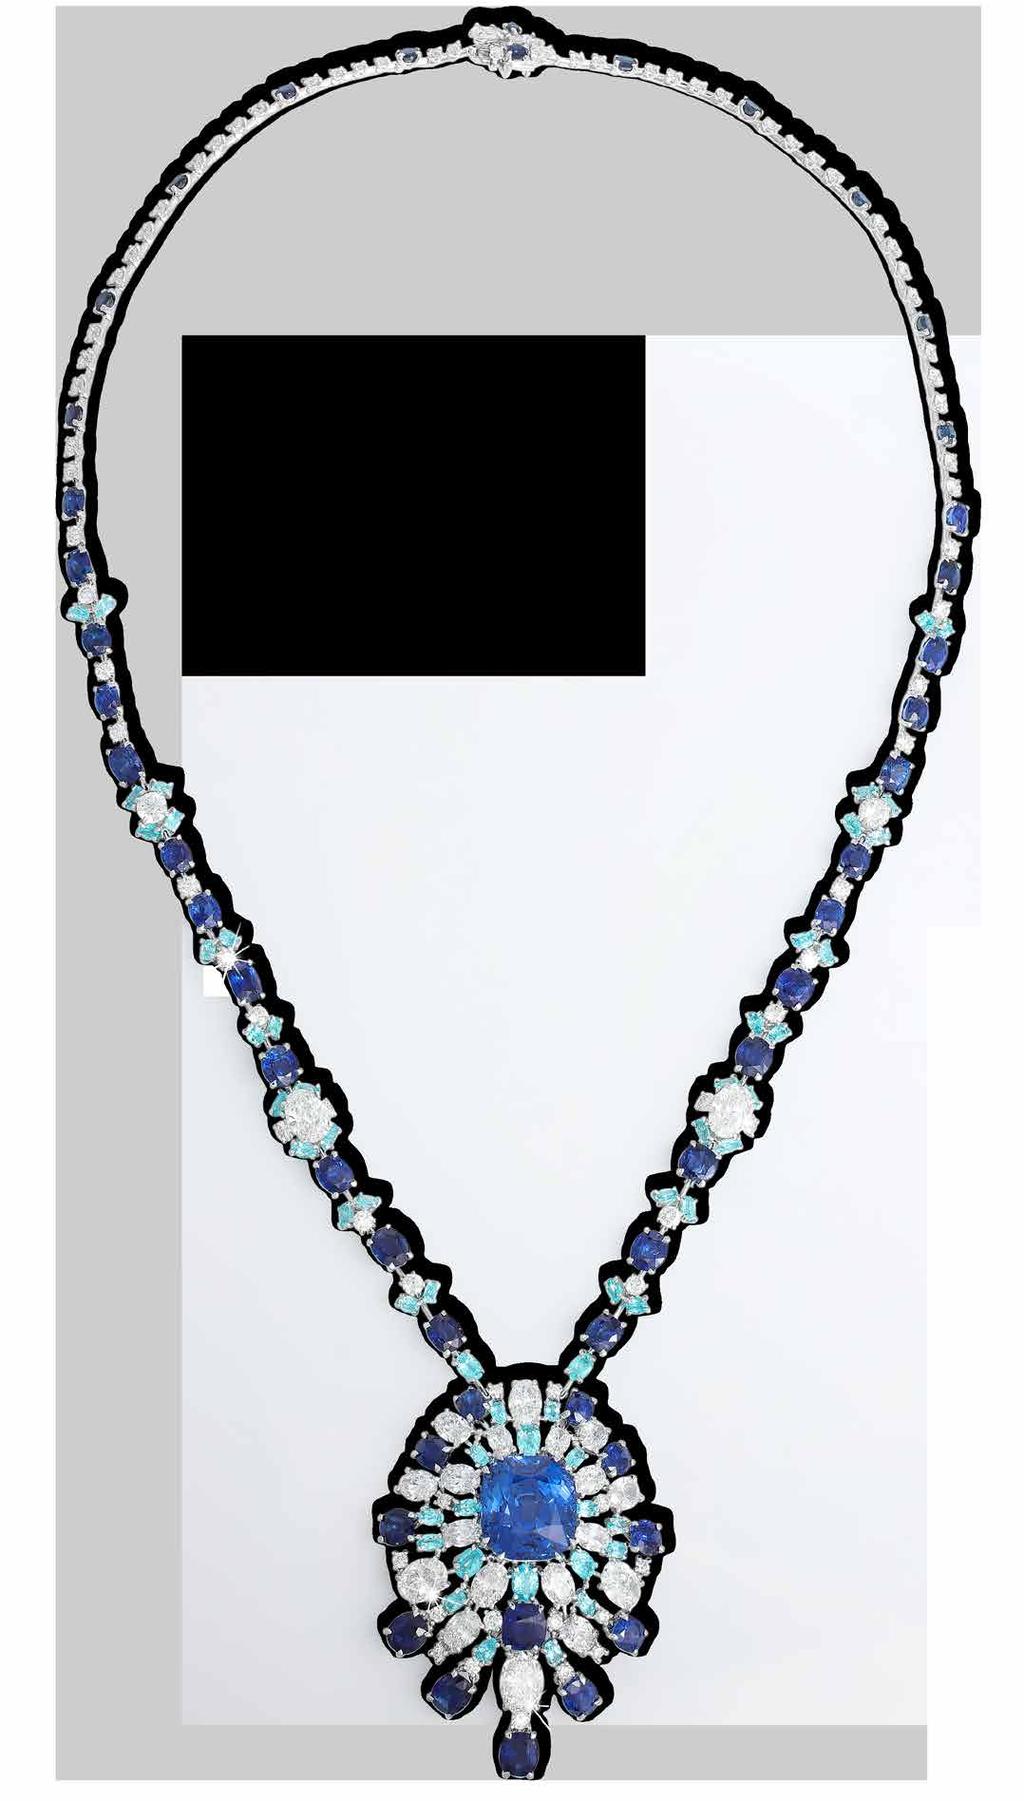 Exceptional Burma Blue Sapphire, Paraiba Tourmaline And White Diamond Necklace in 18K gold and featuring a 53-carat cushion-cut sapphire. POA.